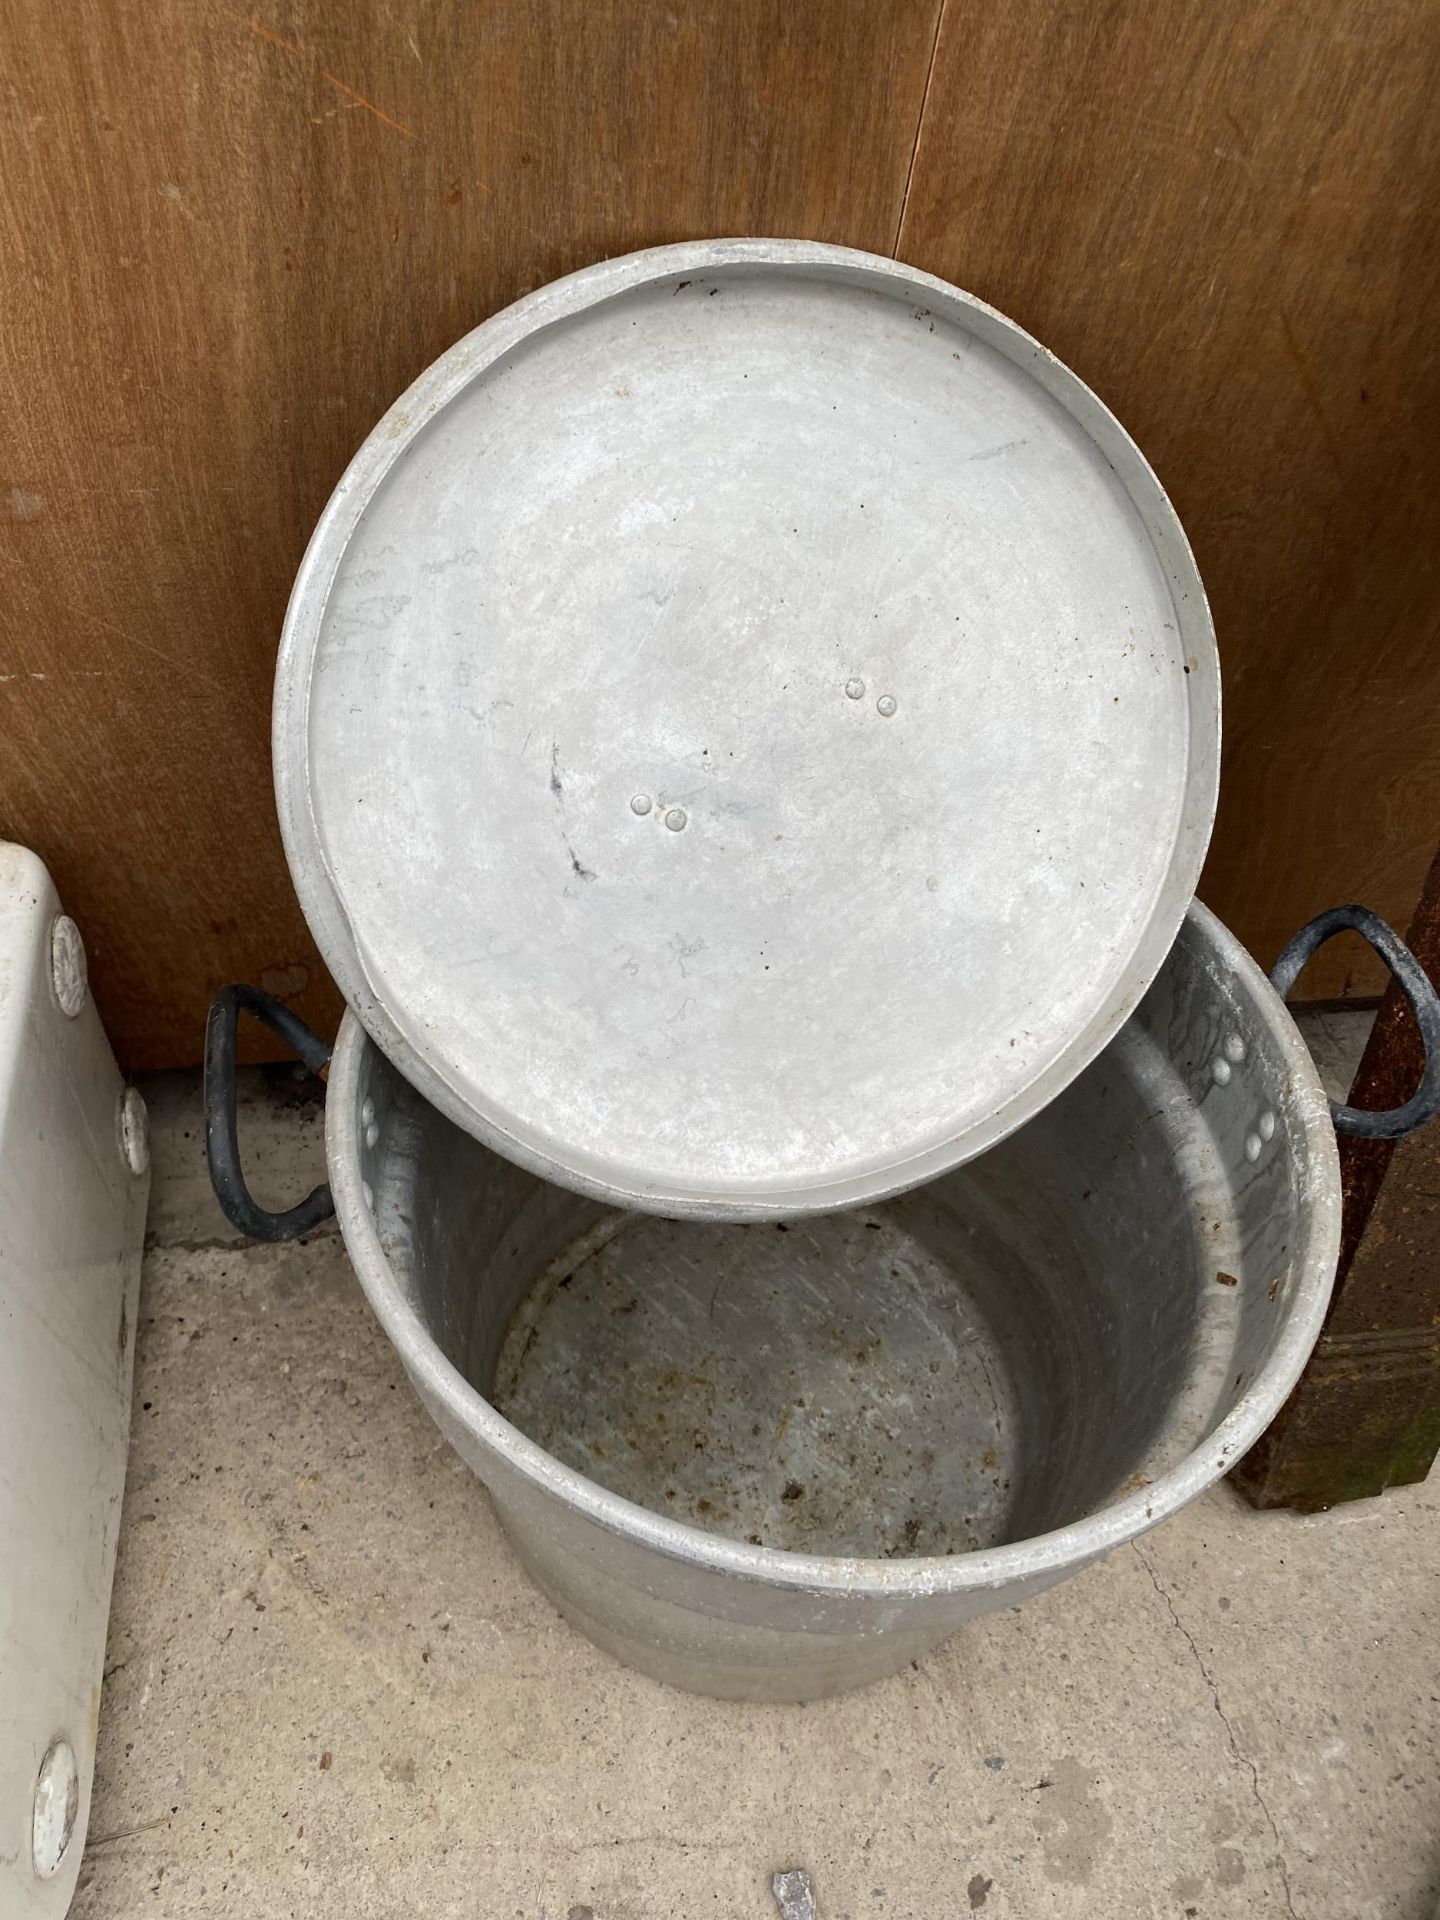 A LARGE ALUMINIUM COOKING POT WITH LID - Image 3 of 3